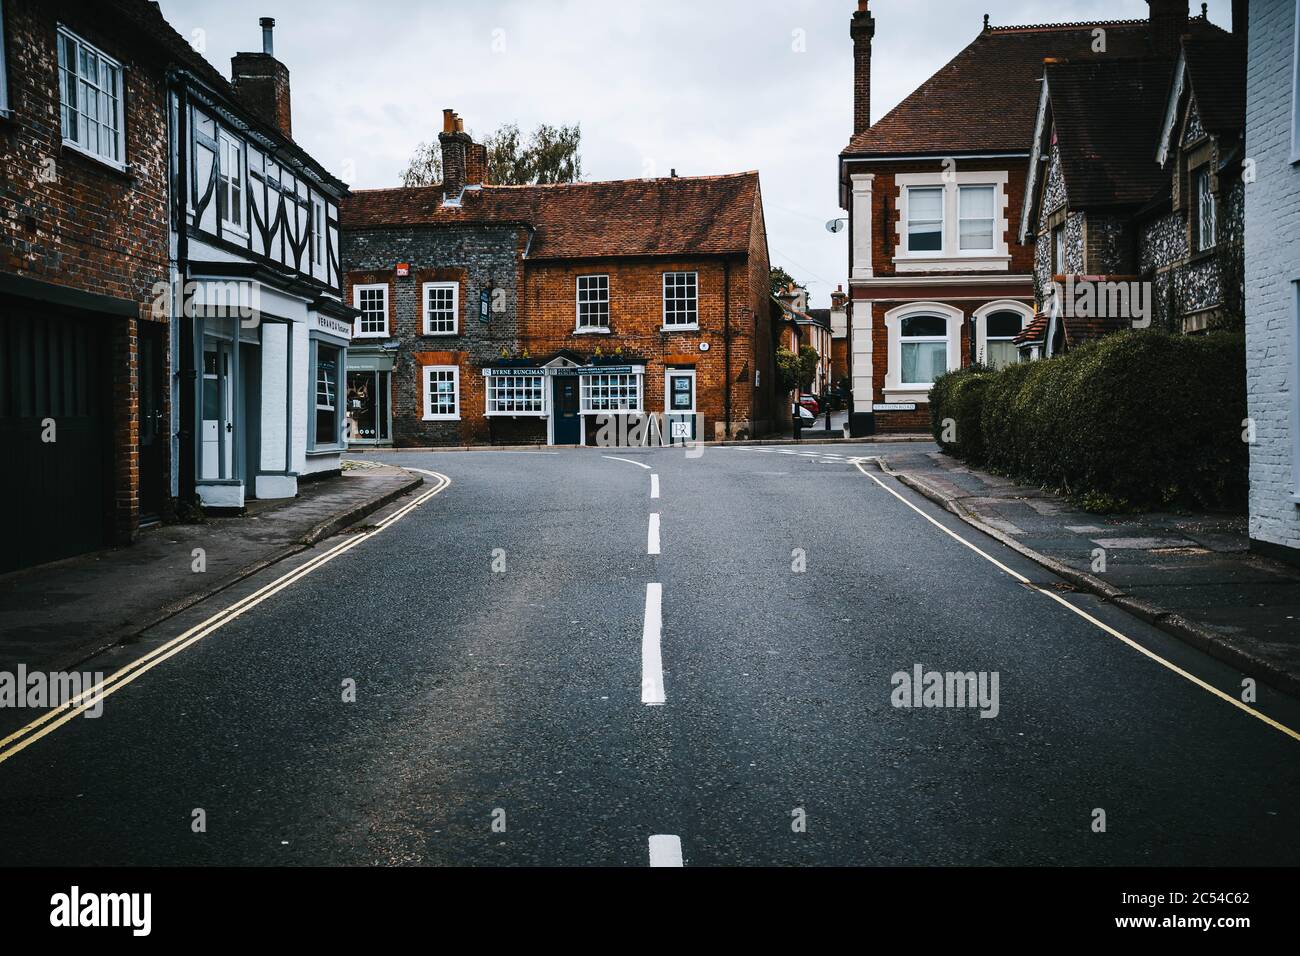 Empty street in the historic village of Wickham in Hampshire, United Kingdom on a cloudy, moody day Stock Photo